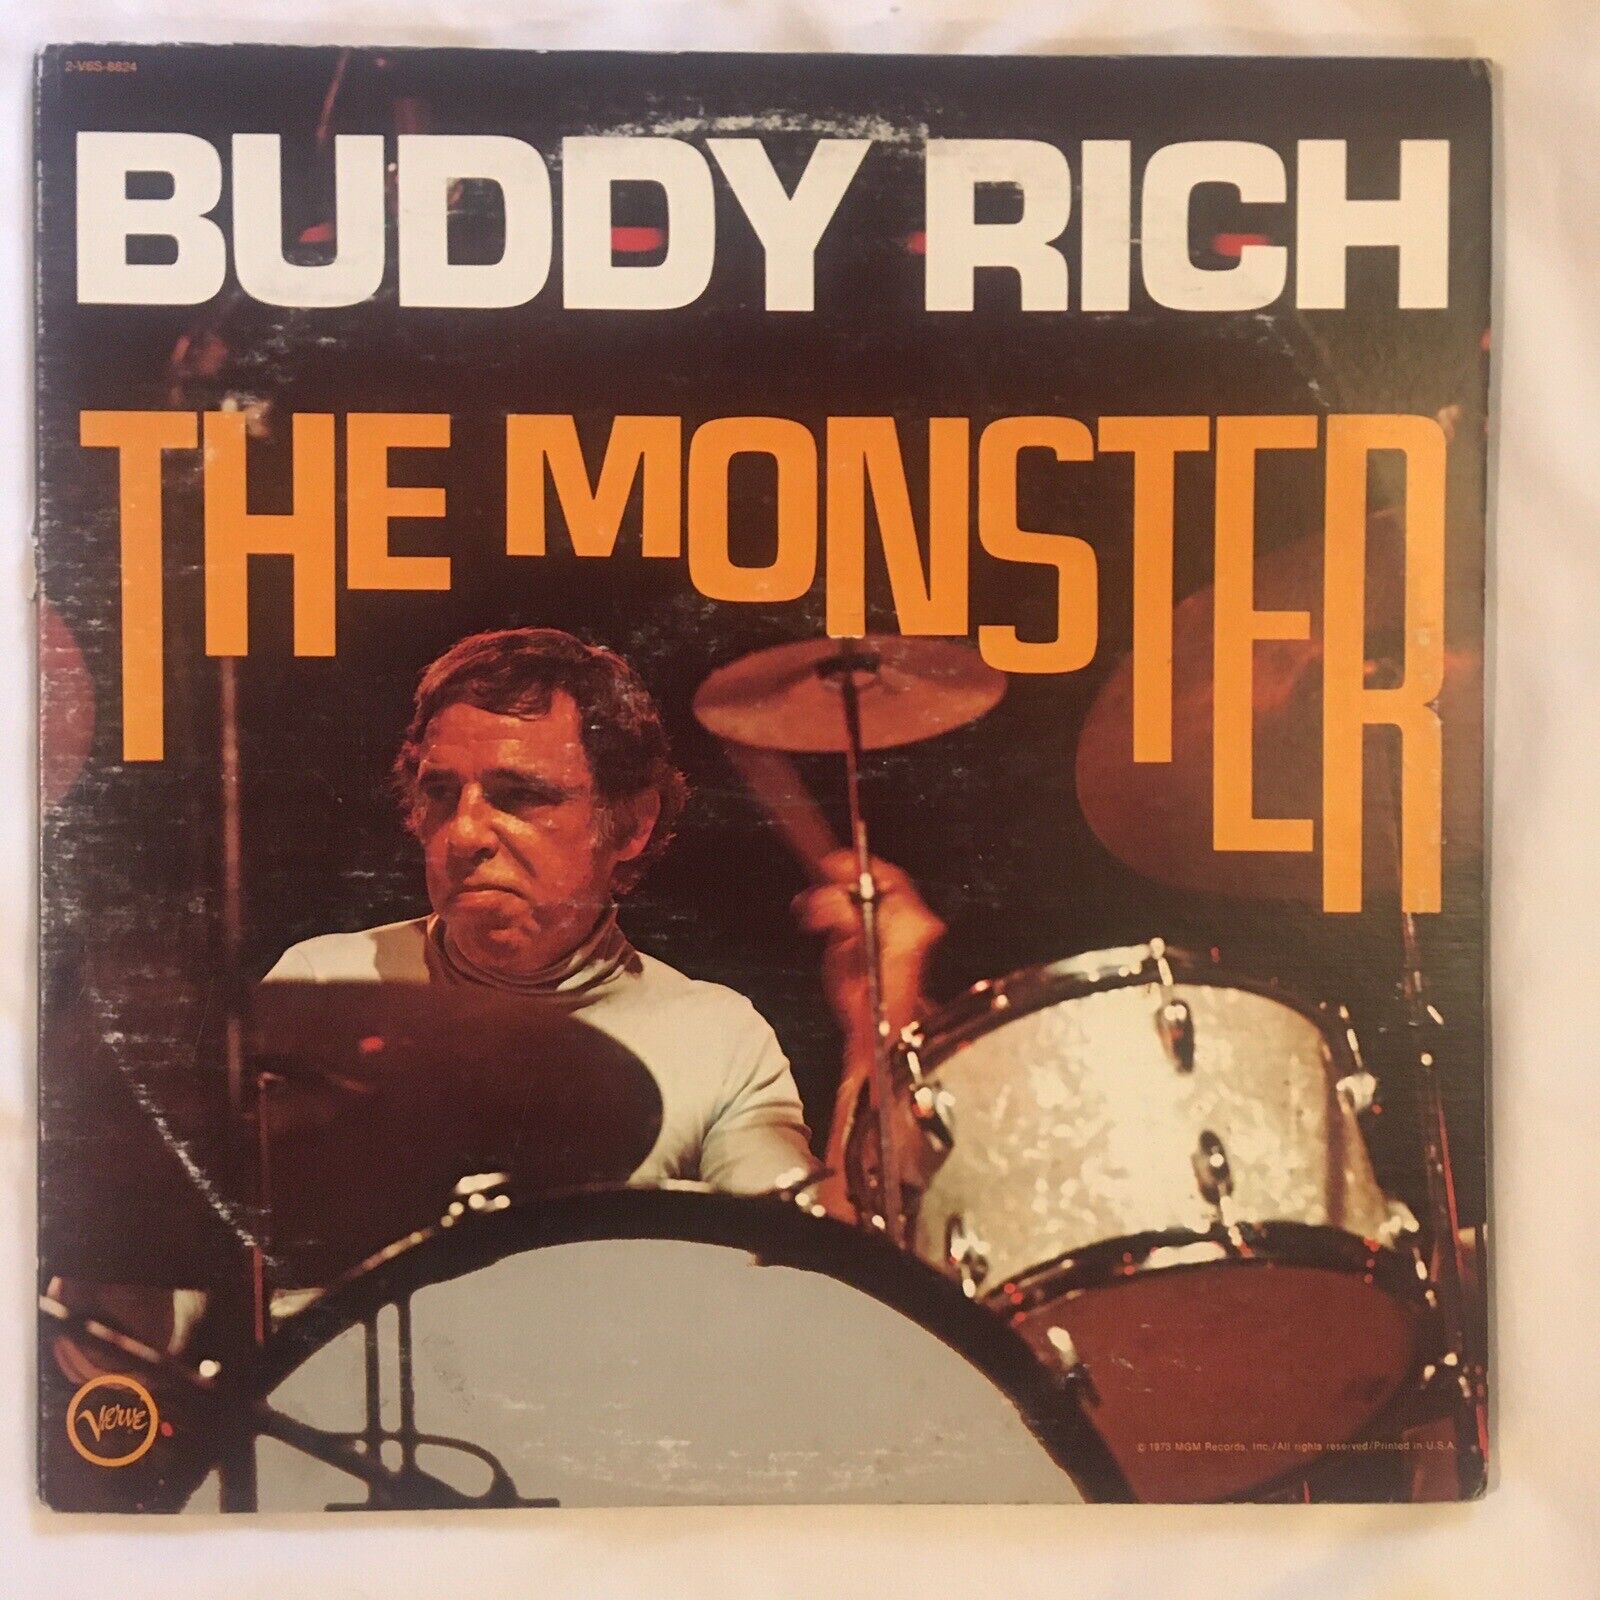 BUDDY RICH MONSTER FIRST PRESS PROMO DOUBLE VINYL LP RECORD ALBUM STEREO VERVE